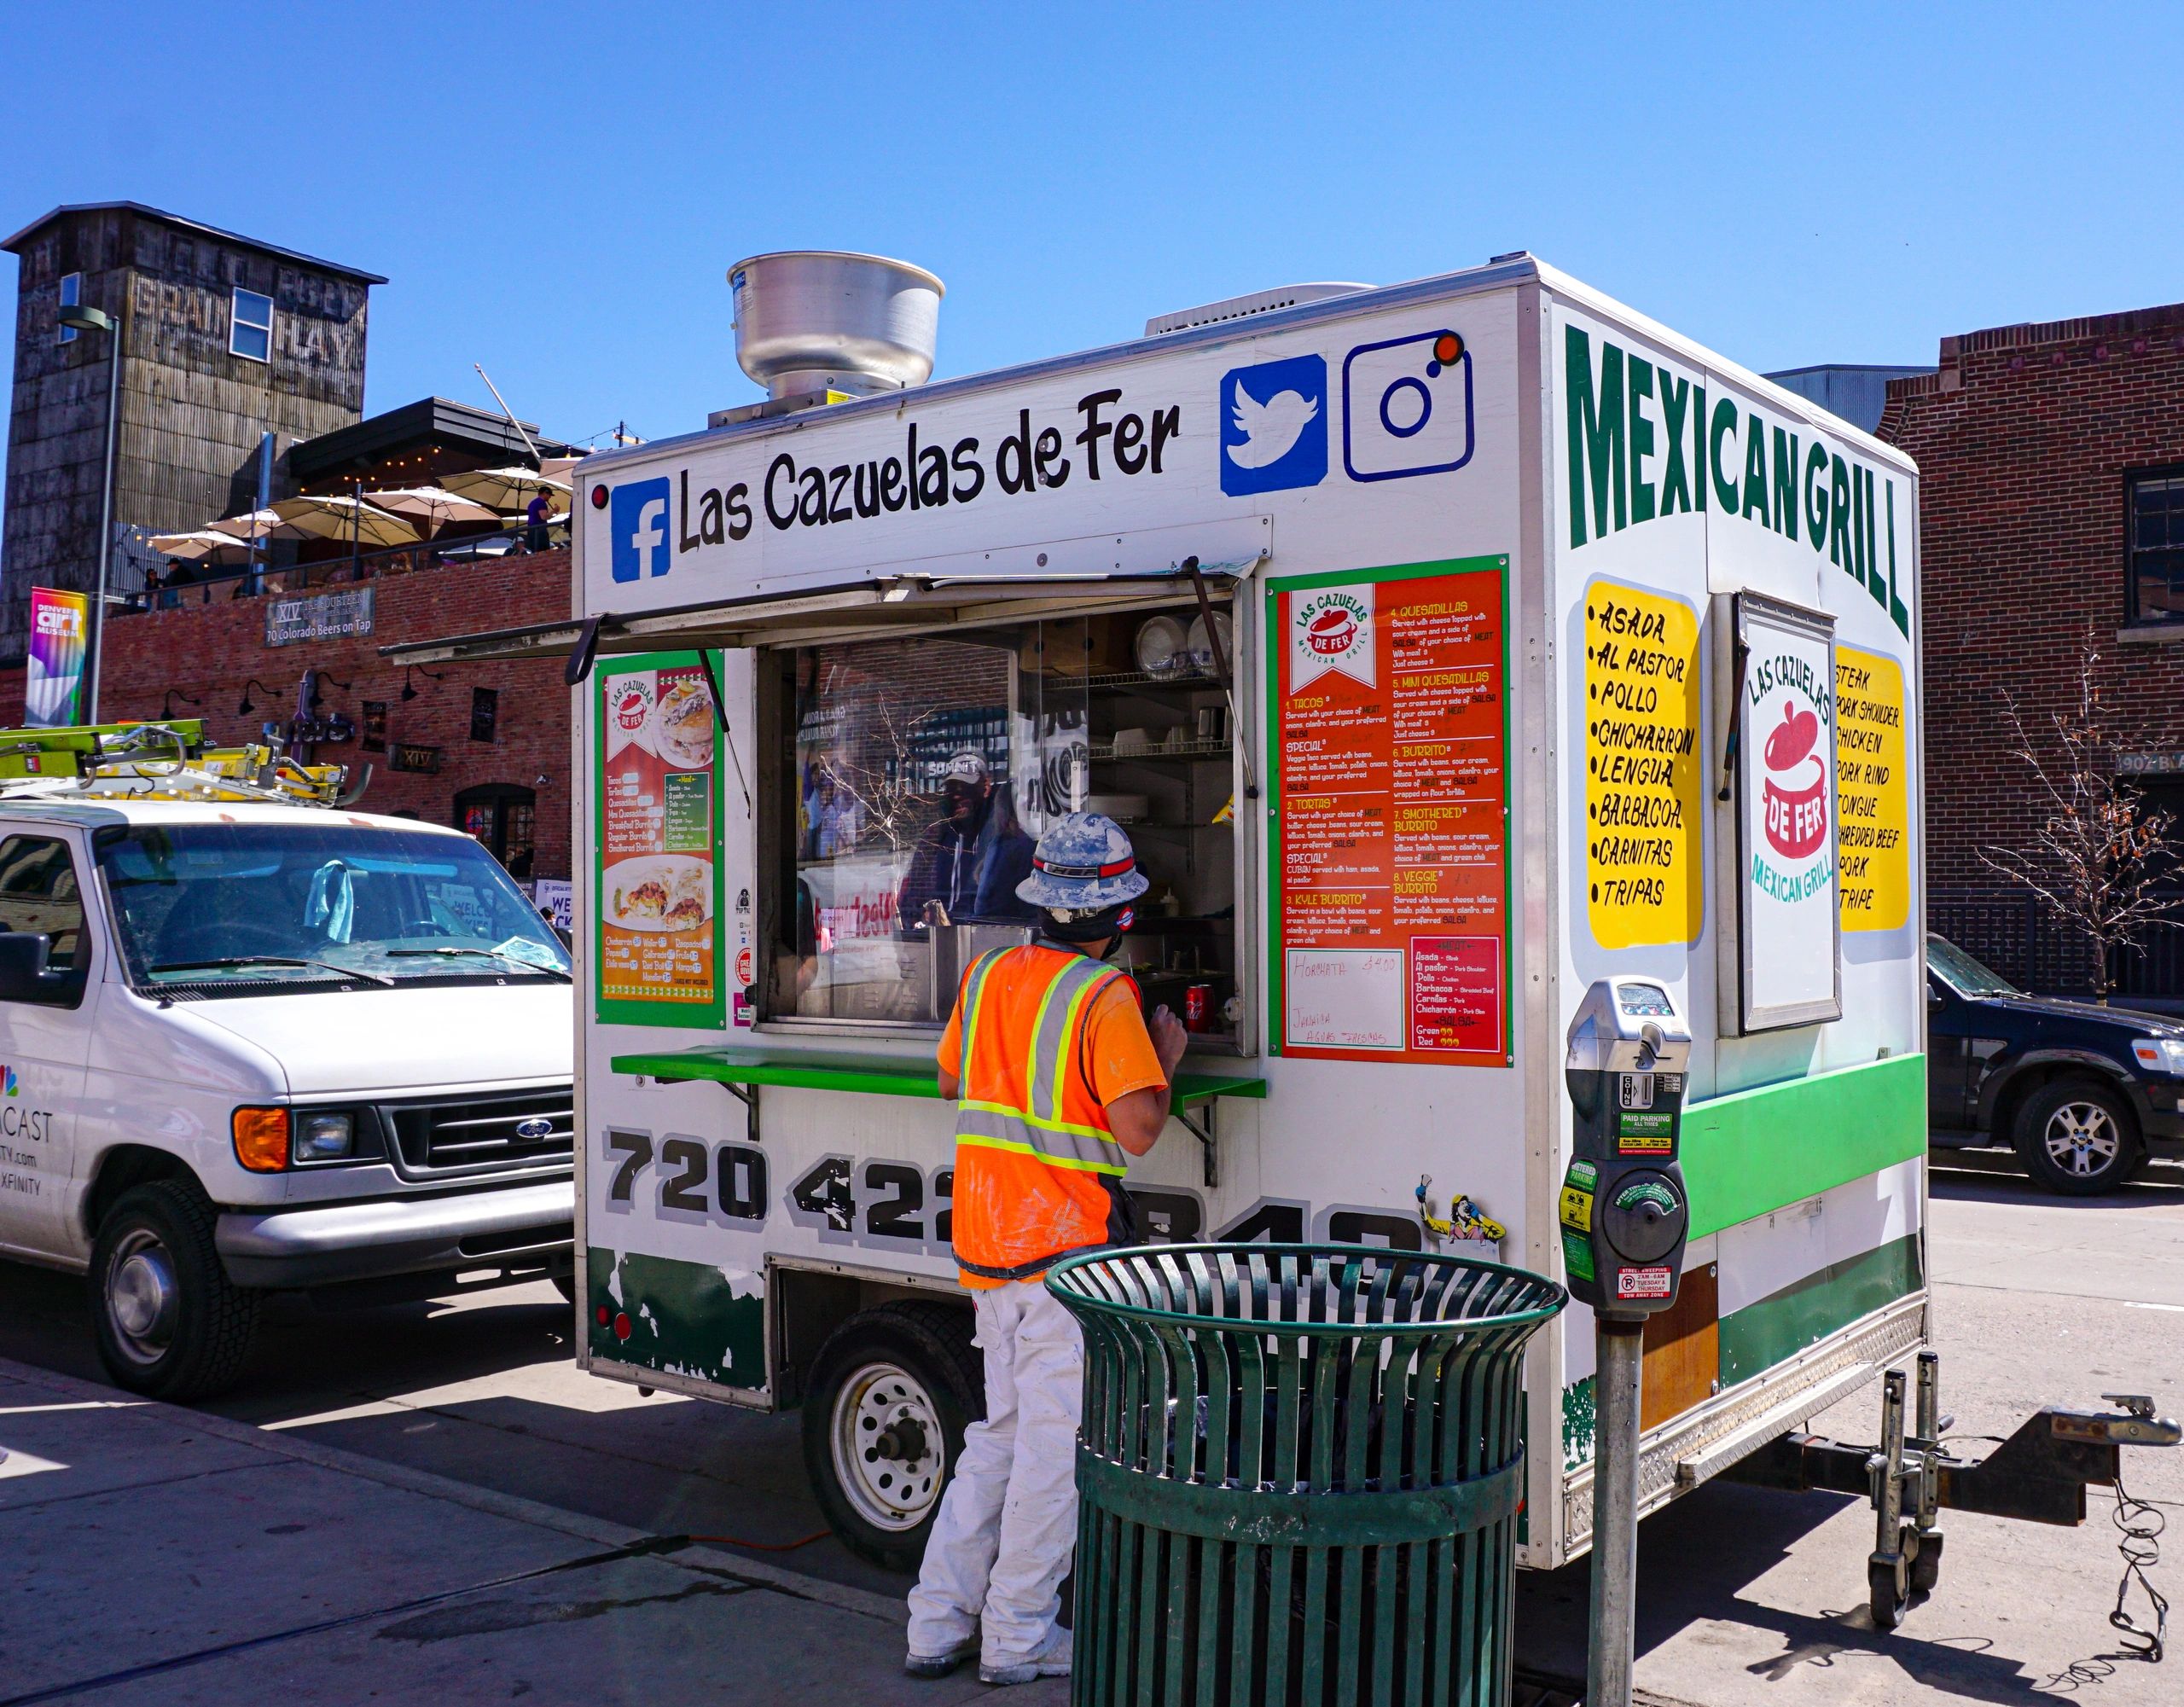 A local worker is ordering from the Cazuelas food truck.